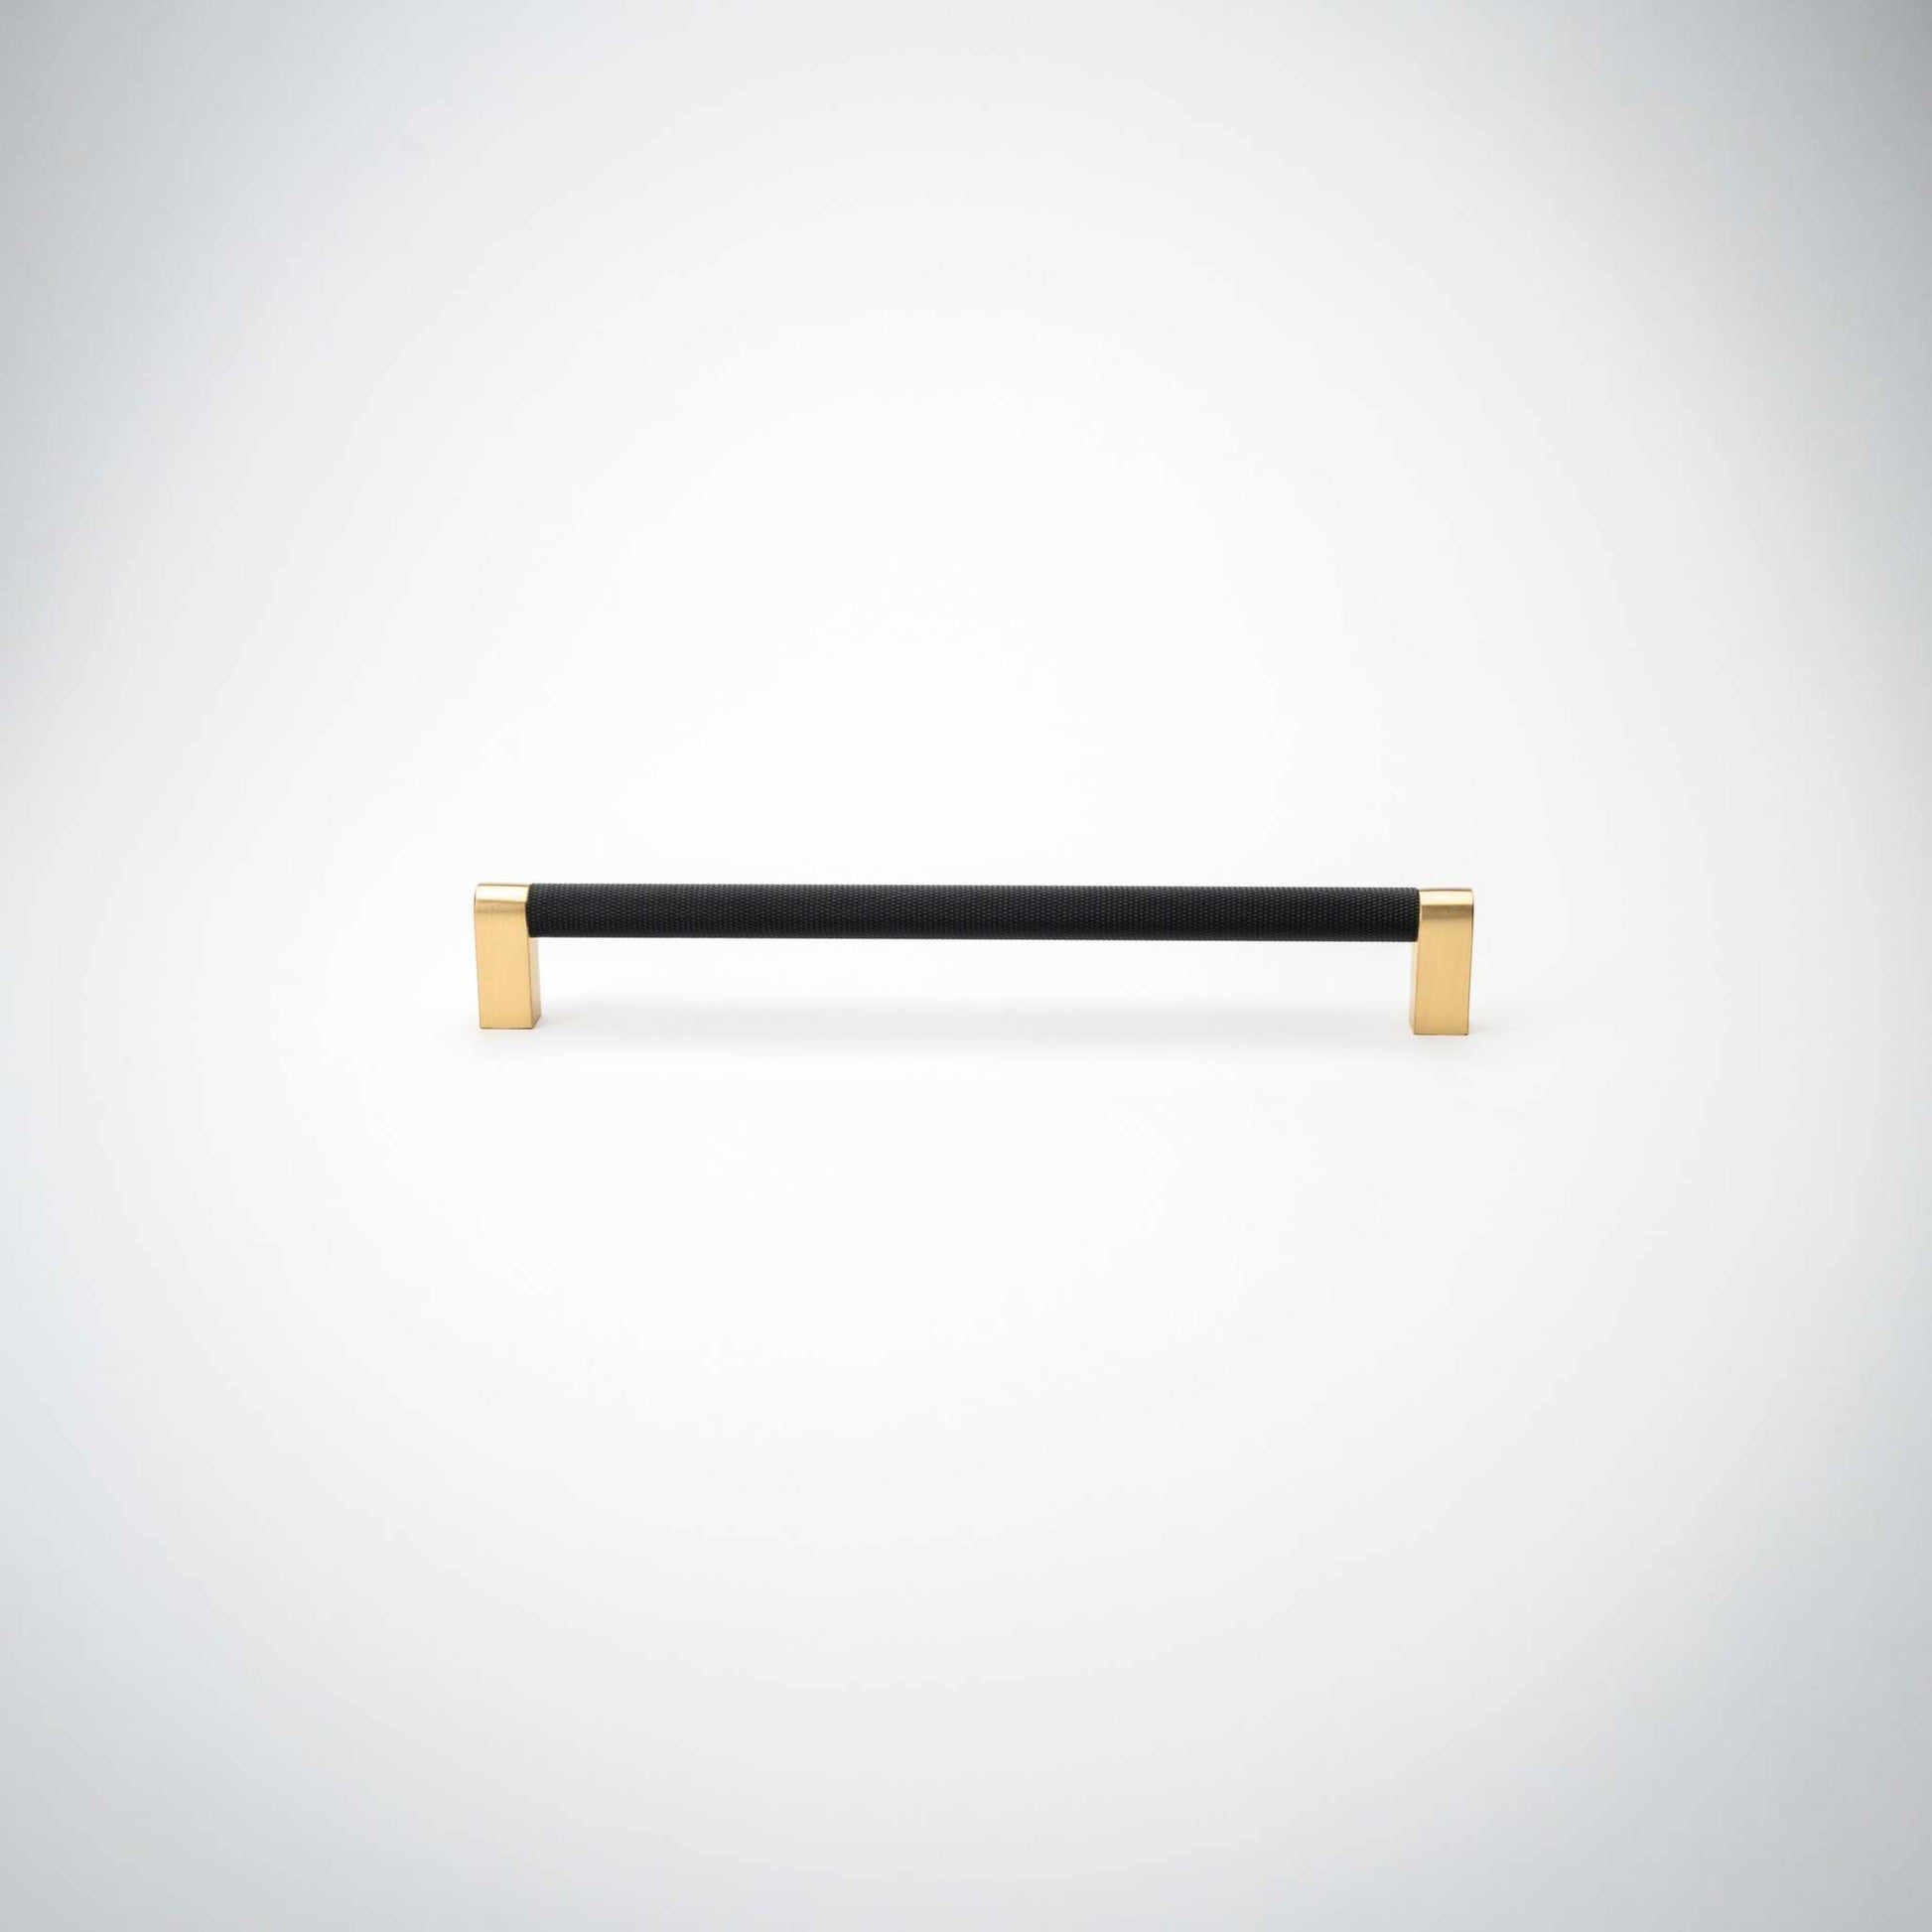 Bold, Black & Gold Knurled Cabinet PullsGo BOLD in your home!Our Bold, Black and "gold" cabinet pull brings a modern feel to your cabinetry. Its two-toned style is visually fresh, while its knurled matpullBold, Black & Gold Knurled Solid Brass Cabinet Pulls